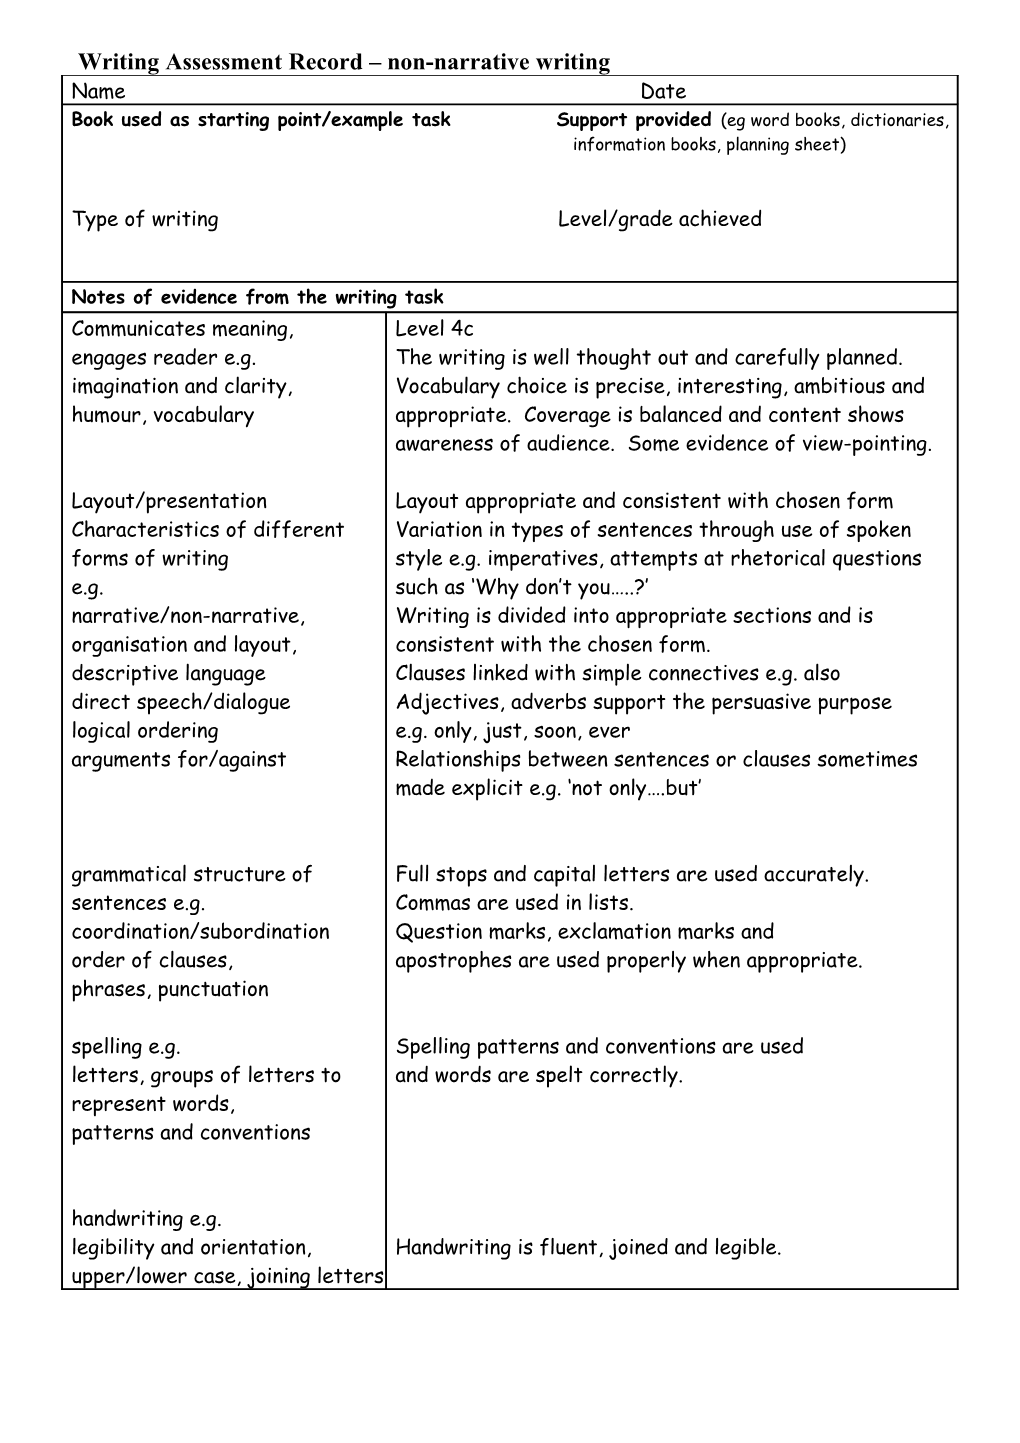 Writing Assessment Record Non-Narrative Writing